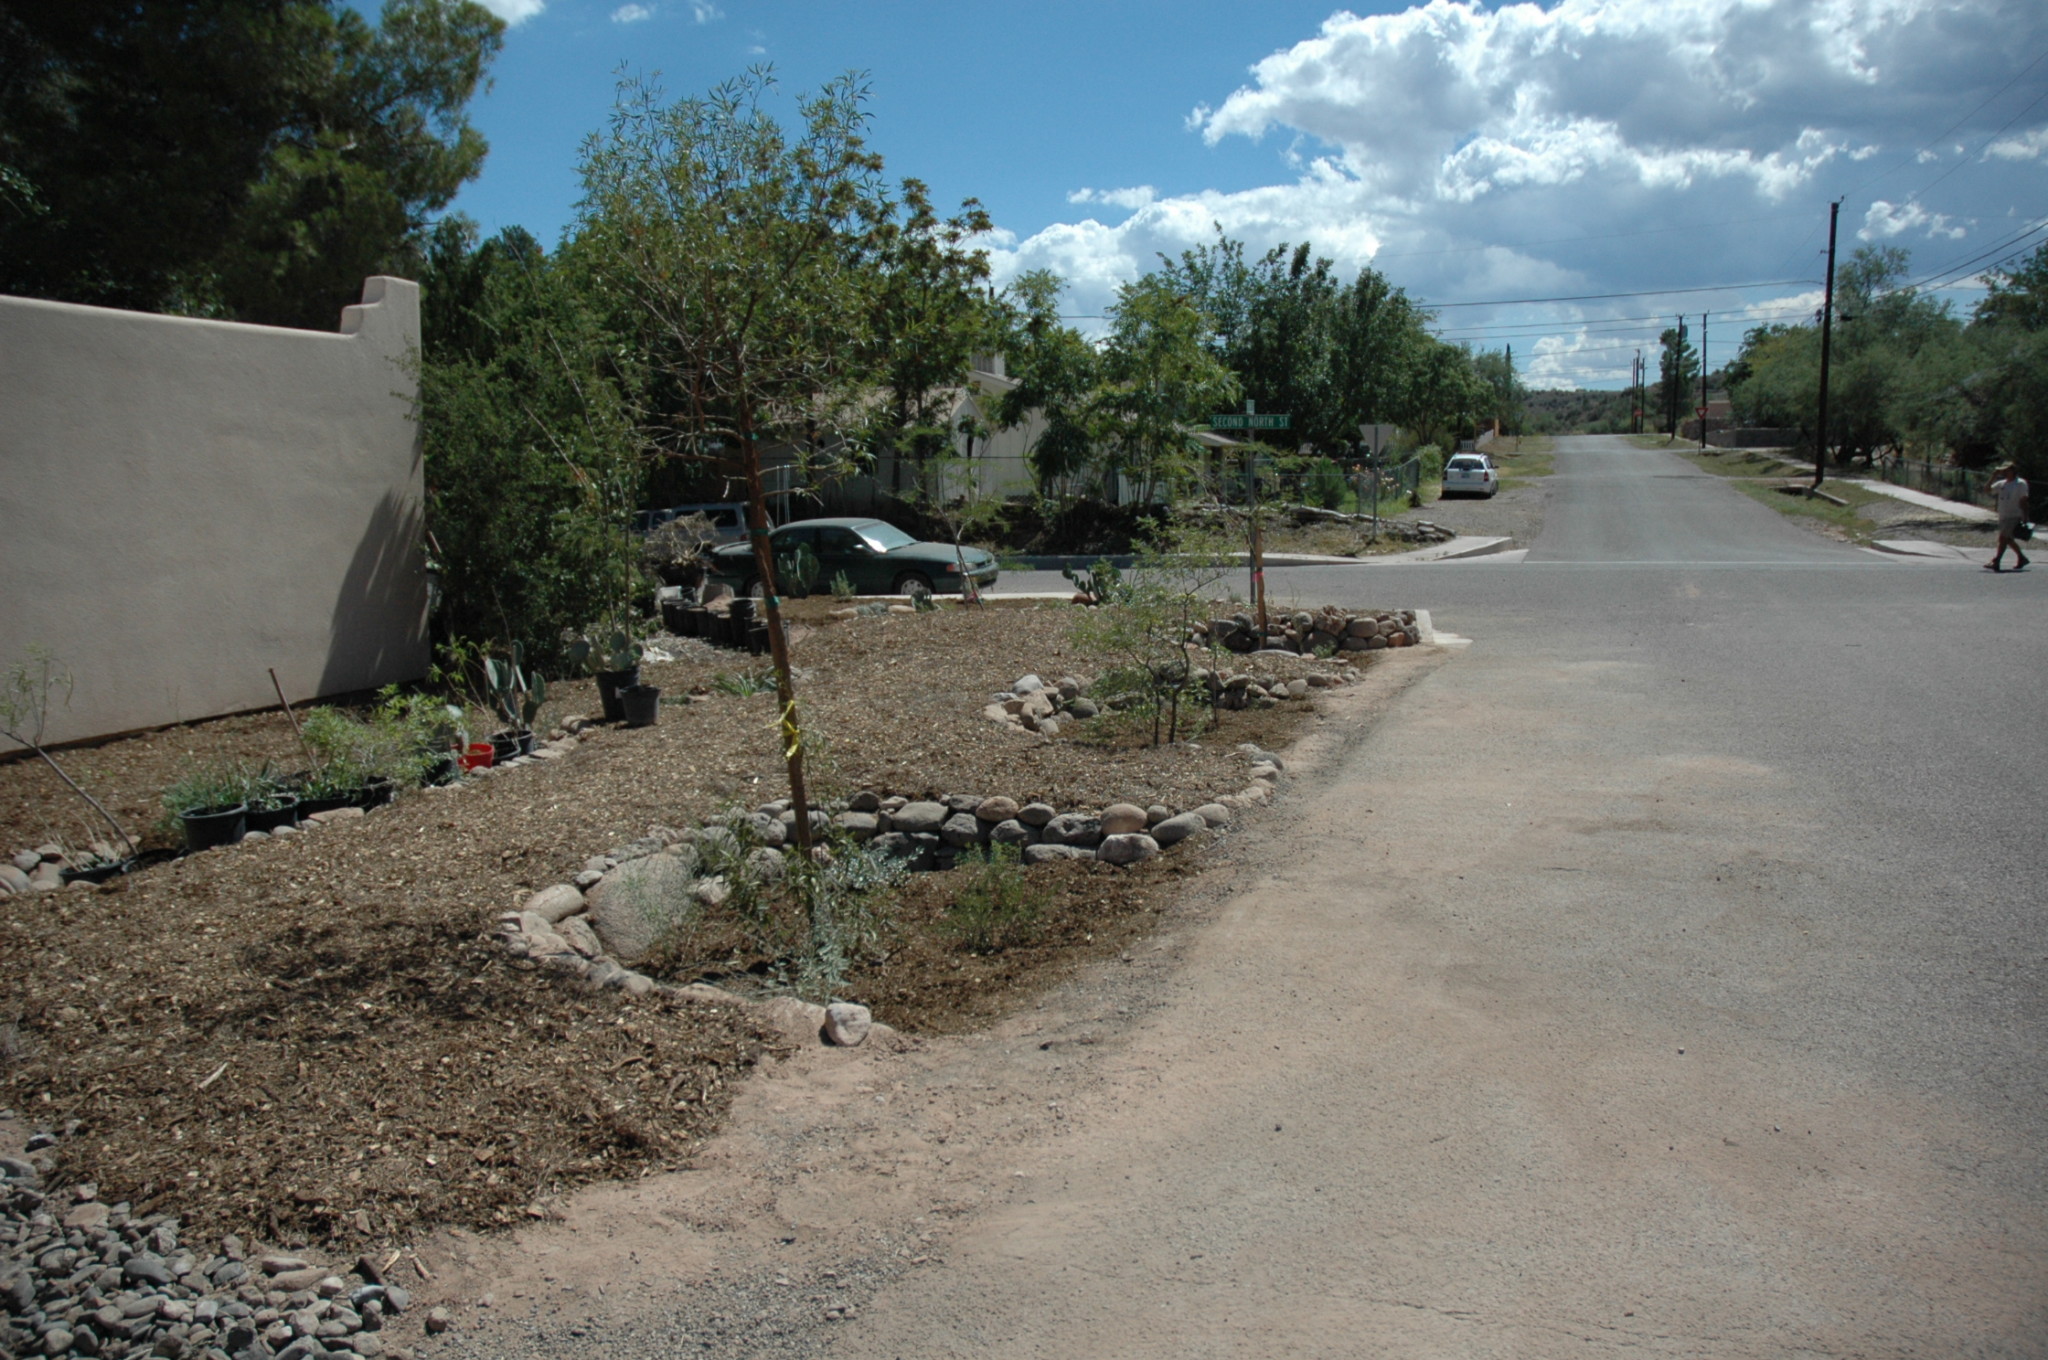 Figure 2. Water-harvesting eddy basins created by Eden on Earth on a curbless street in Clarkdale, Arizona. Before the work, road runoff would flow up against and flood the house. After the work, the dirt dug from the street-side basins created a raised walkway that acts as a berm ensuring no basin water or street runoff can flow up against the house. Before the work, there was no walkway; now there is a wonderful path wide enough for two people to walk side by side, separated by the trees from cars and street. Now the trees have grown to shade both walkway and street. Photo taken by Carol Luhman just after the work was completed in 2007.